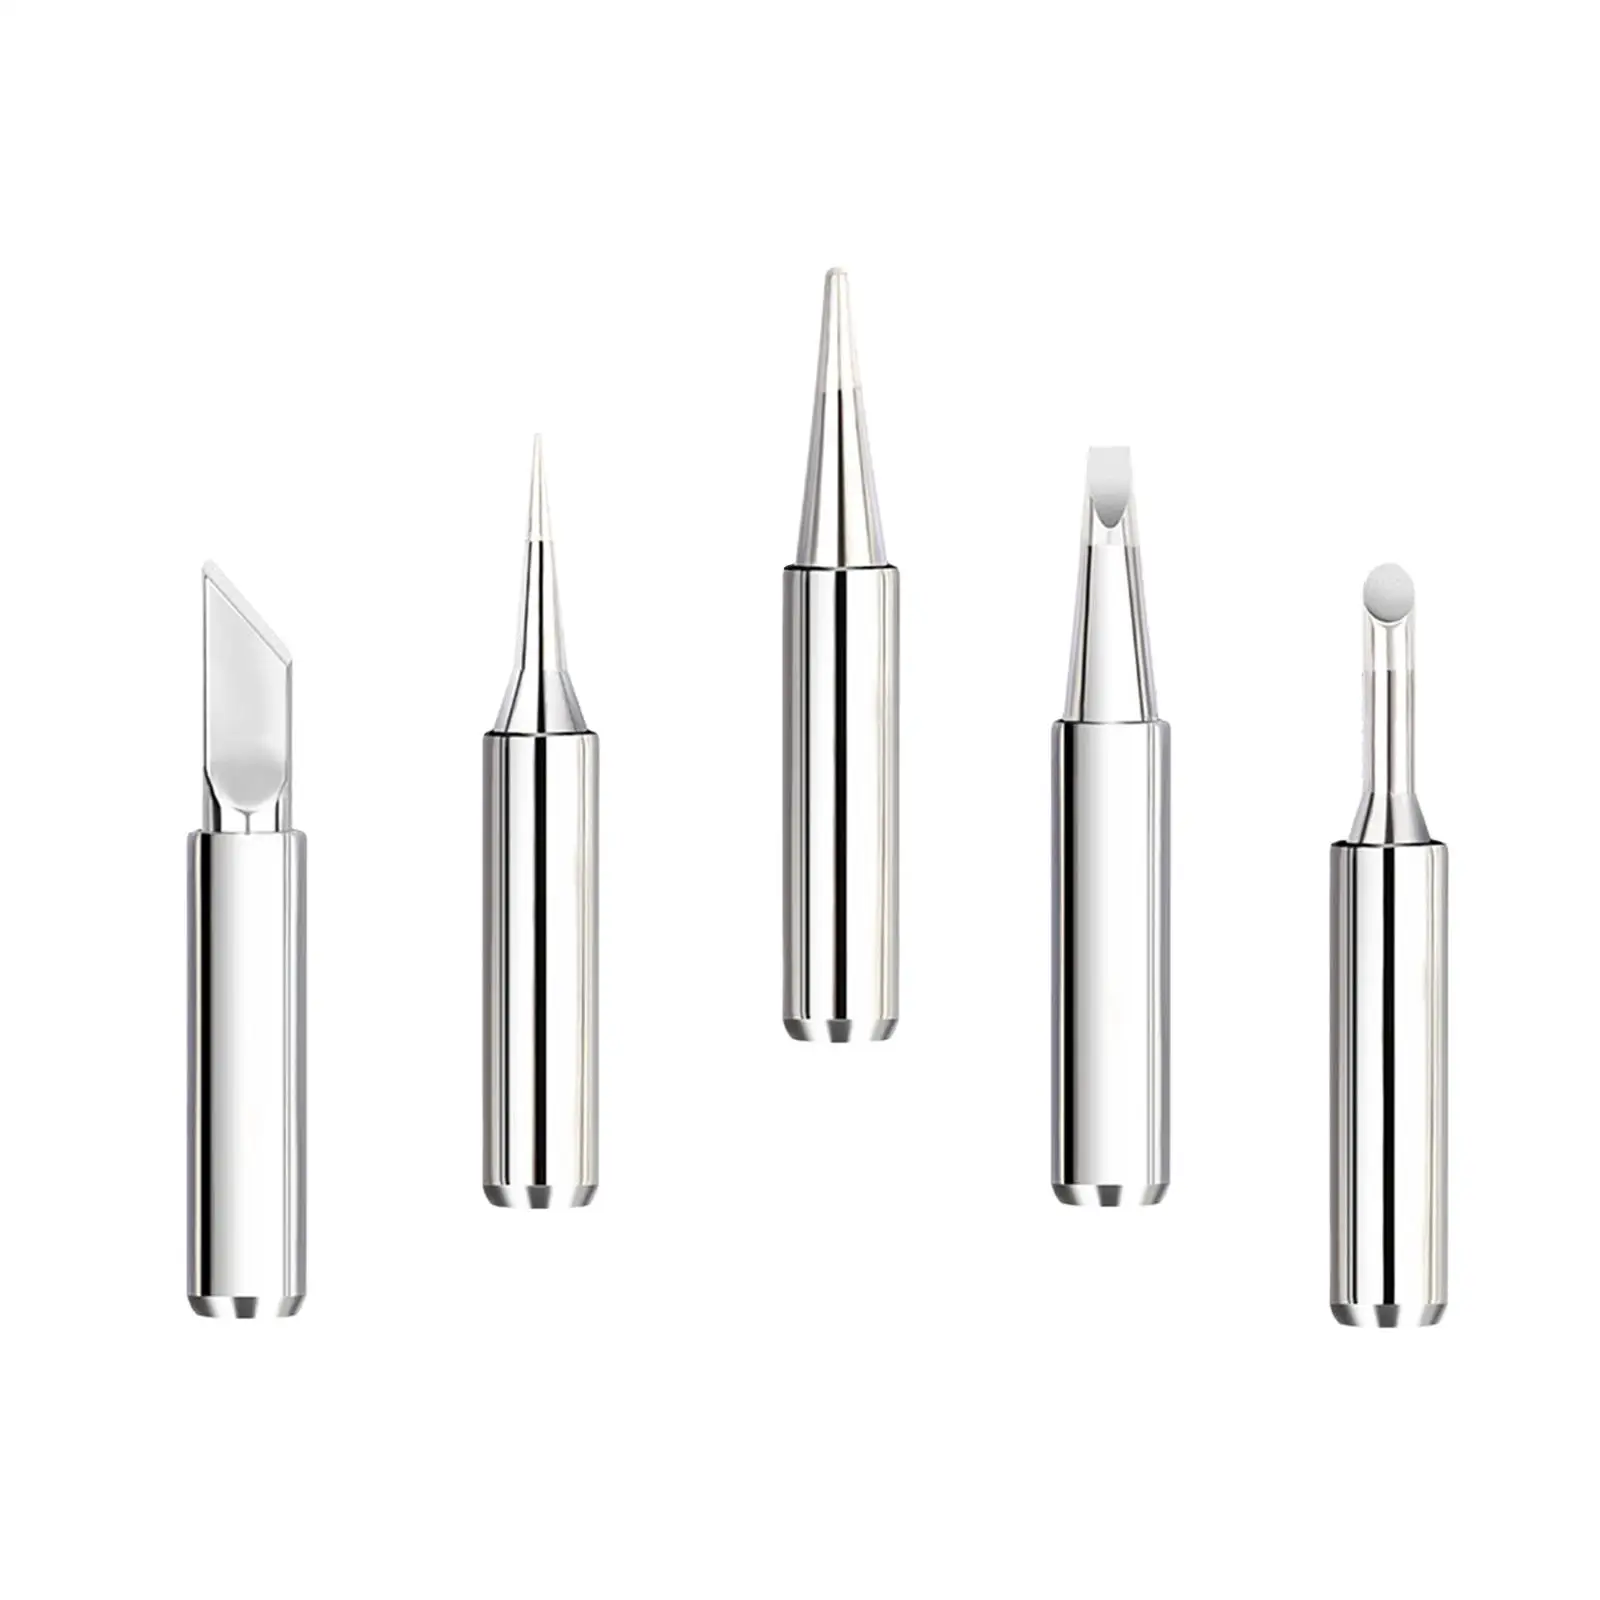 5x Copper Soldering Iron Tips Stable B K 2.4D 3C for Soldering Iron Soldering Station Accessories Replace Replacement